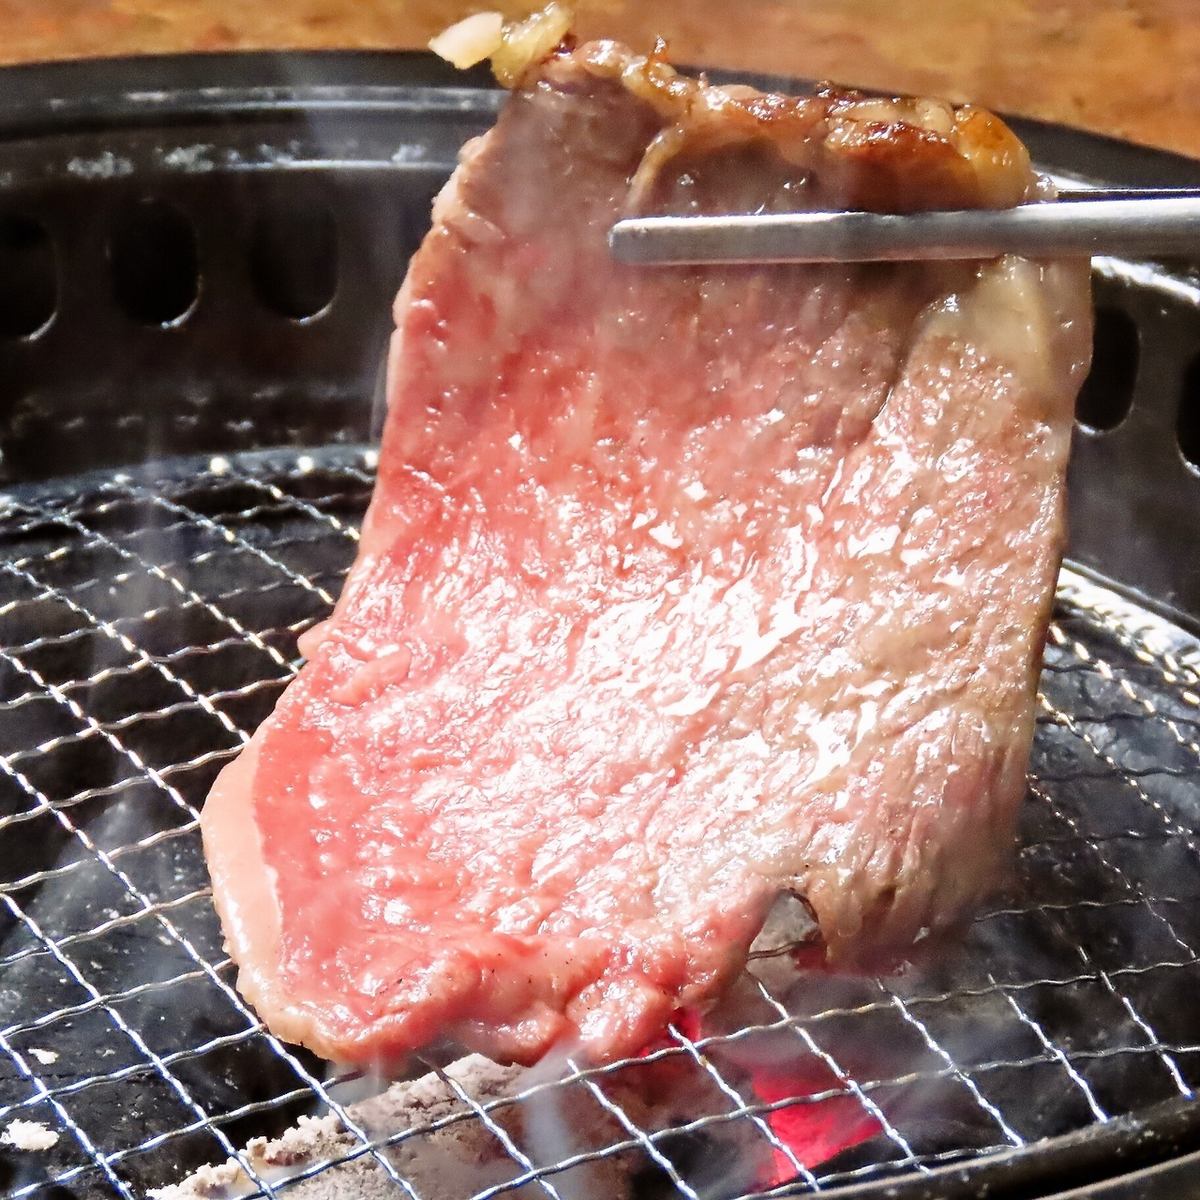 Reasonably priced high-quality meat ♪